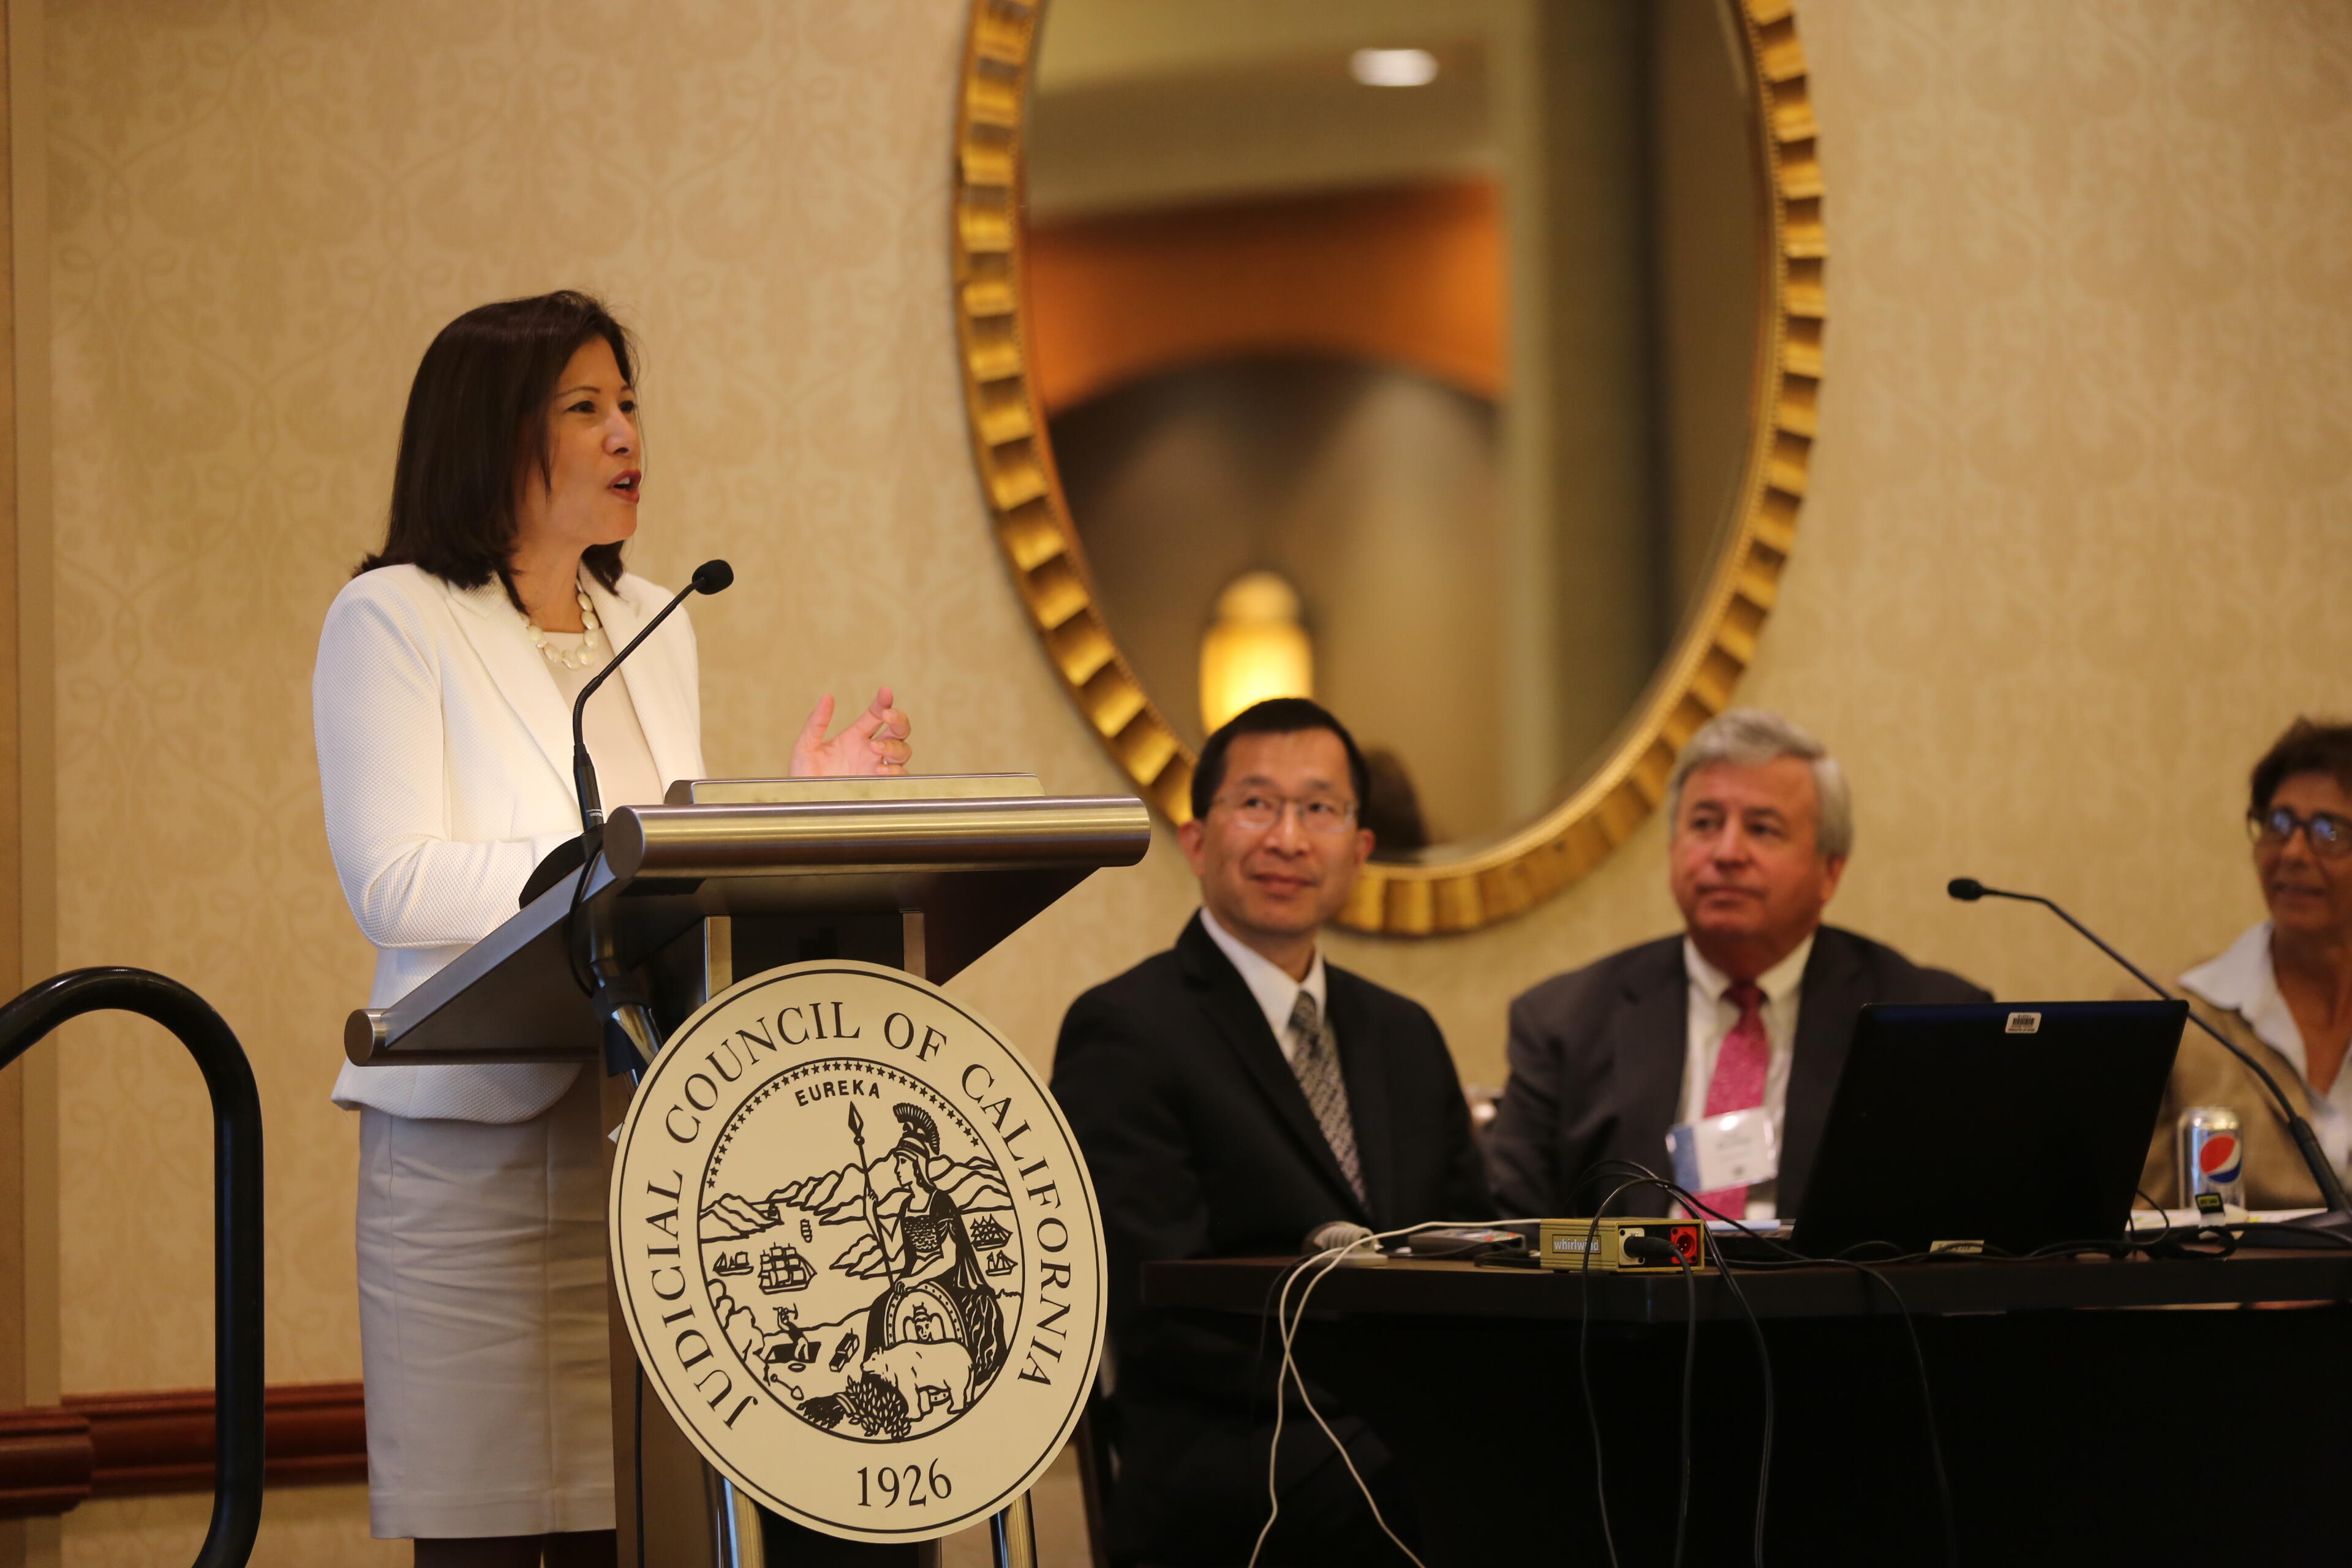 Chief Justice Tani G. Cantil-Sakauye speaks to attendees at the Judicial Branch Technology Summit.